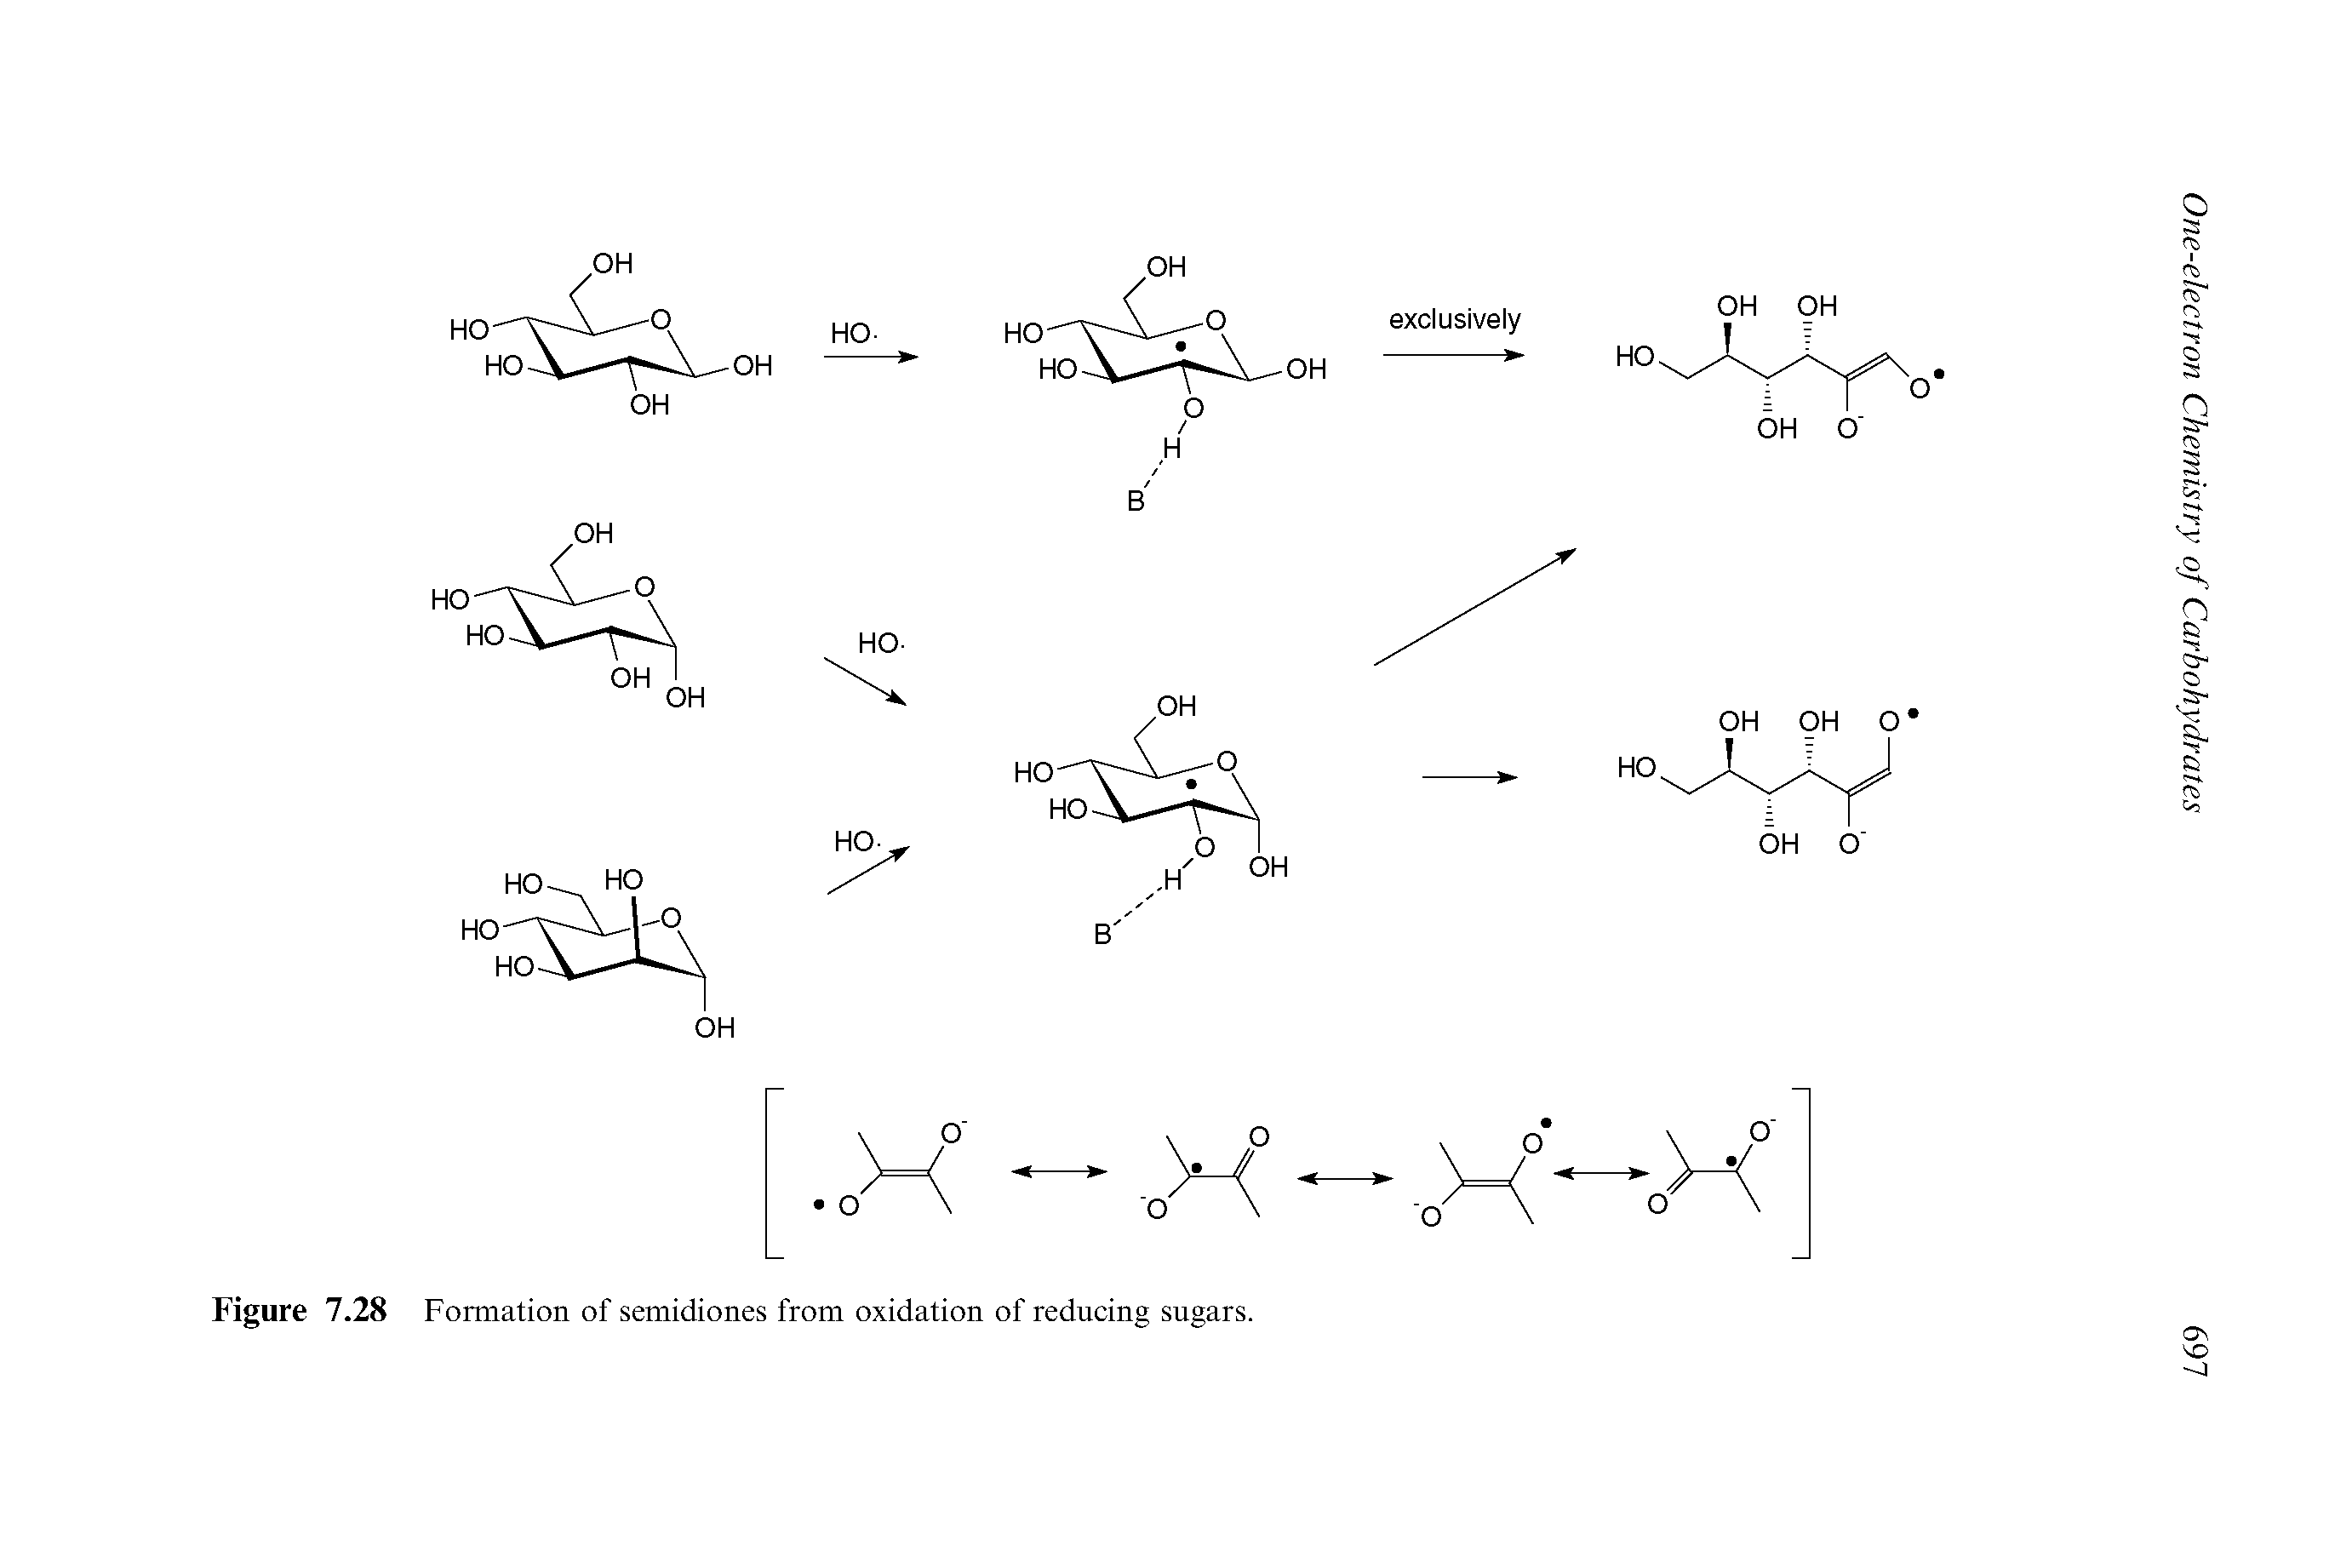 Figure 7.28 Formation of semidiones from oxidation of reducing sugars.